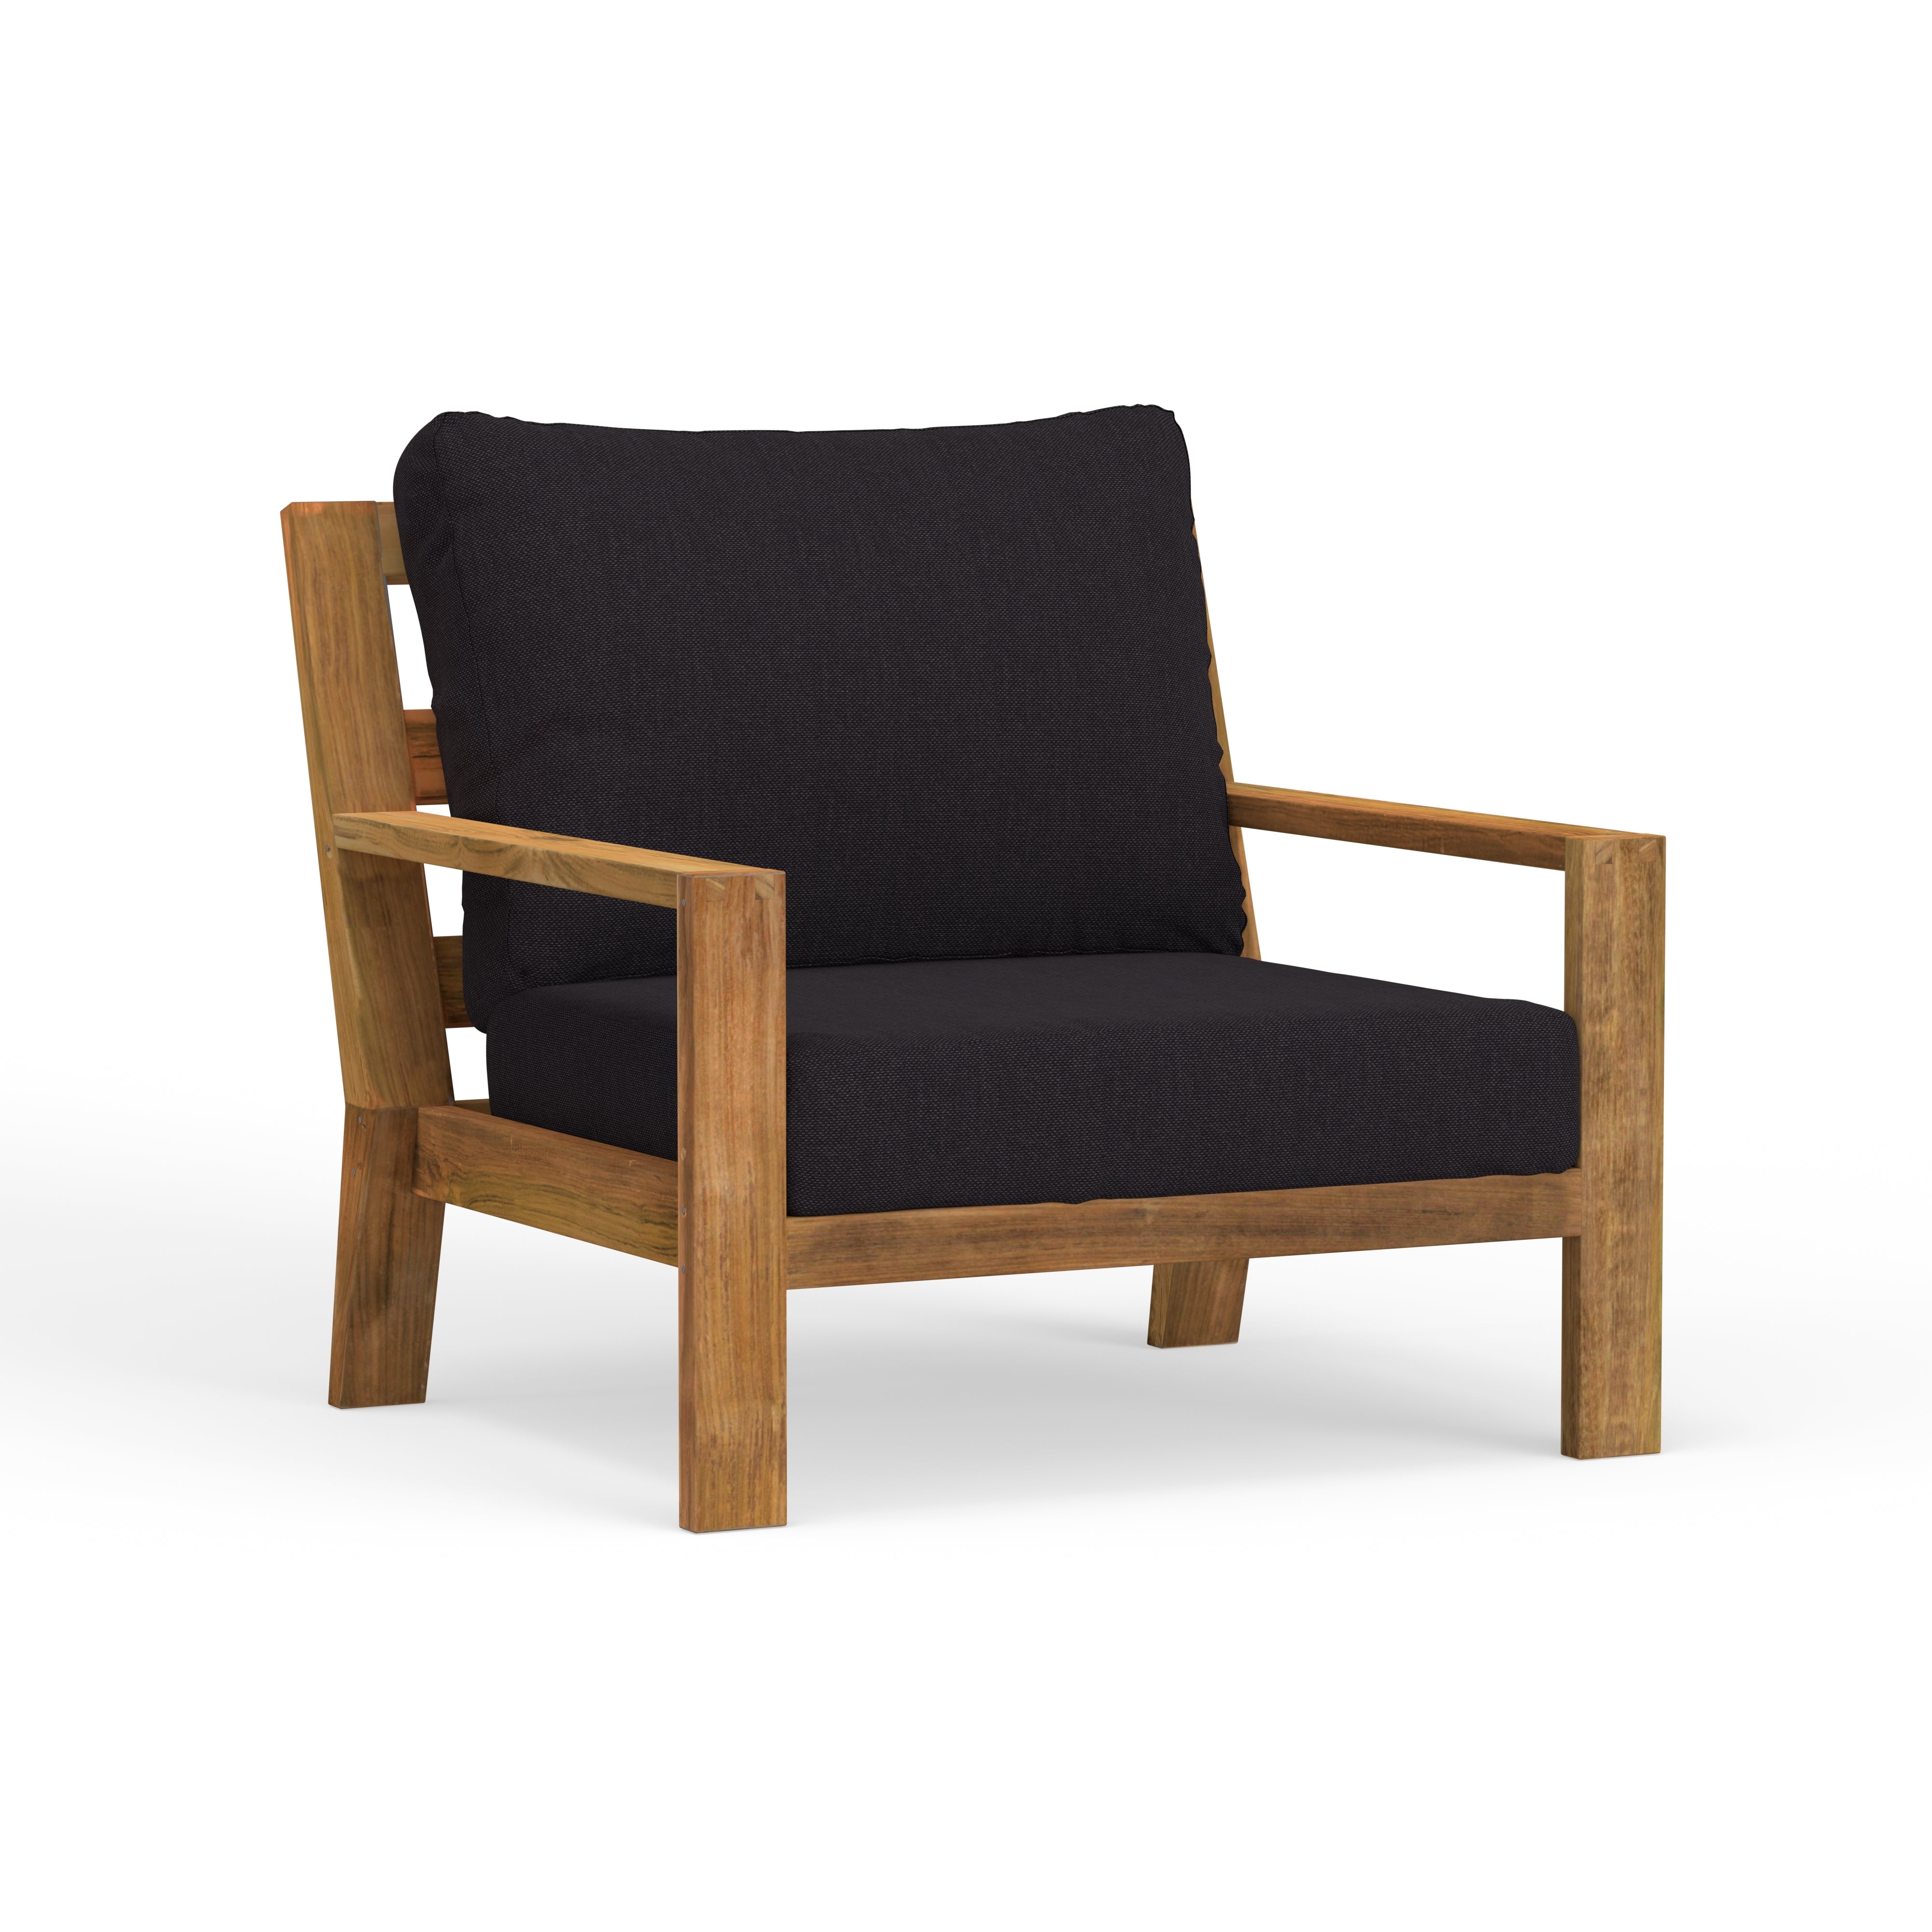 Great Outdoor Teak Chair With The Most Comfortable Cushion Available Now